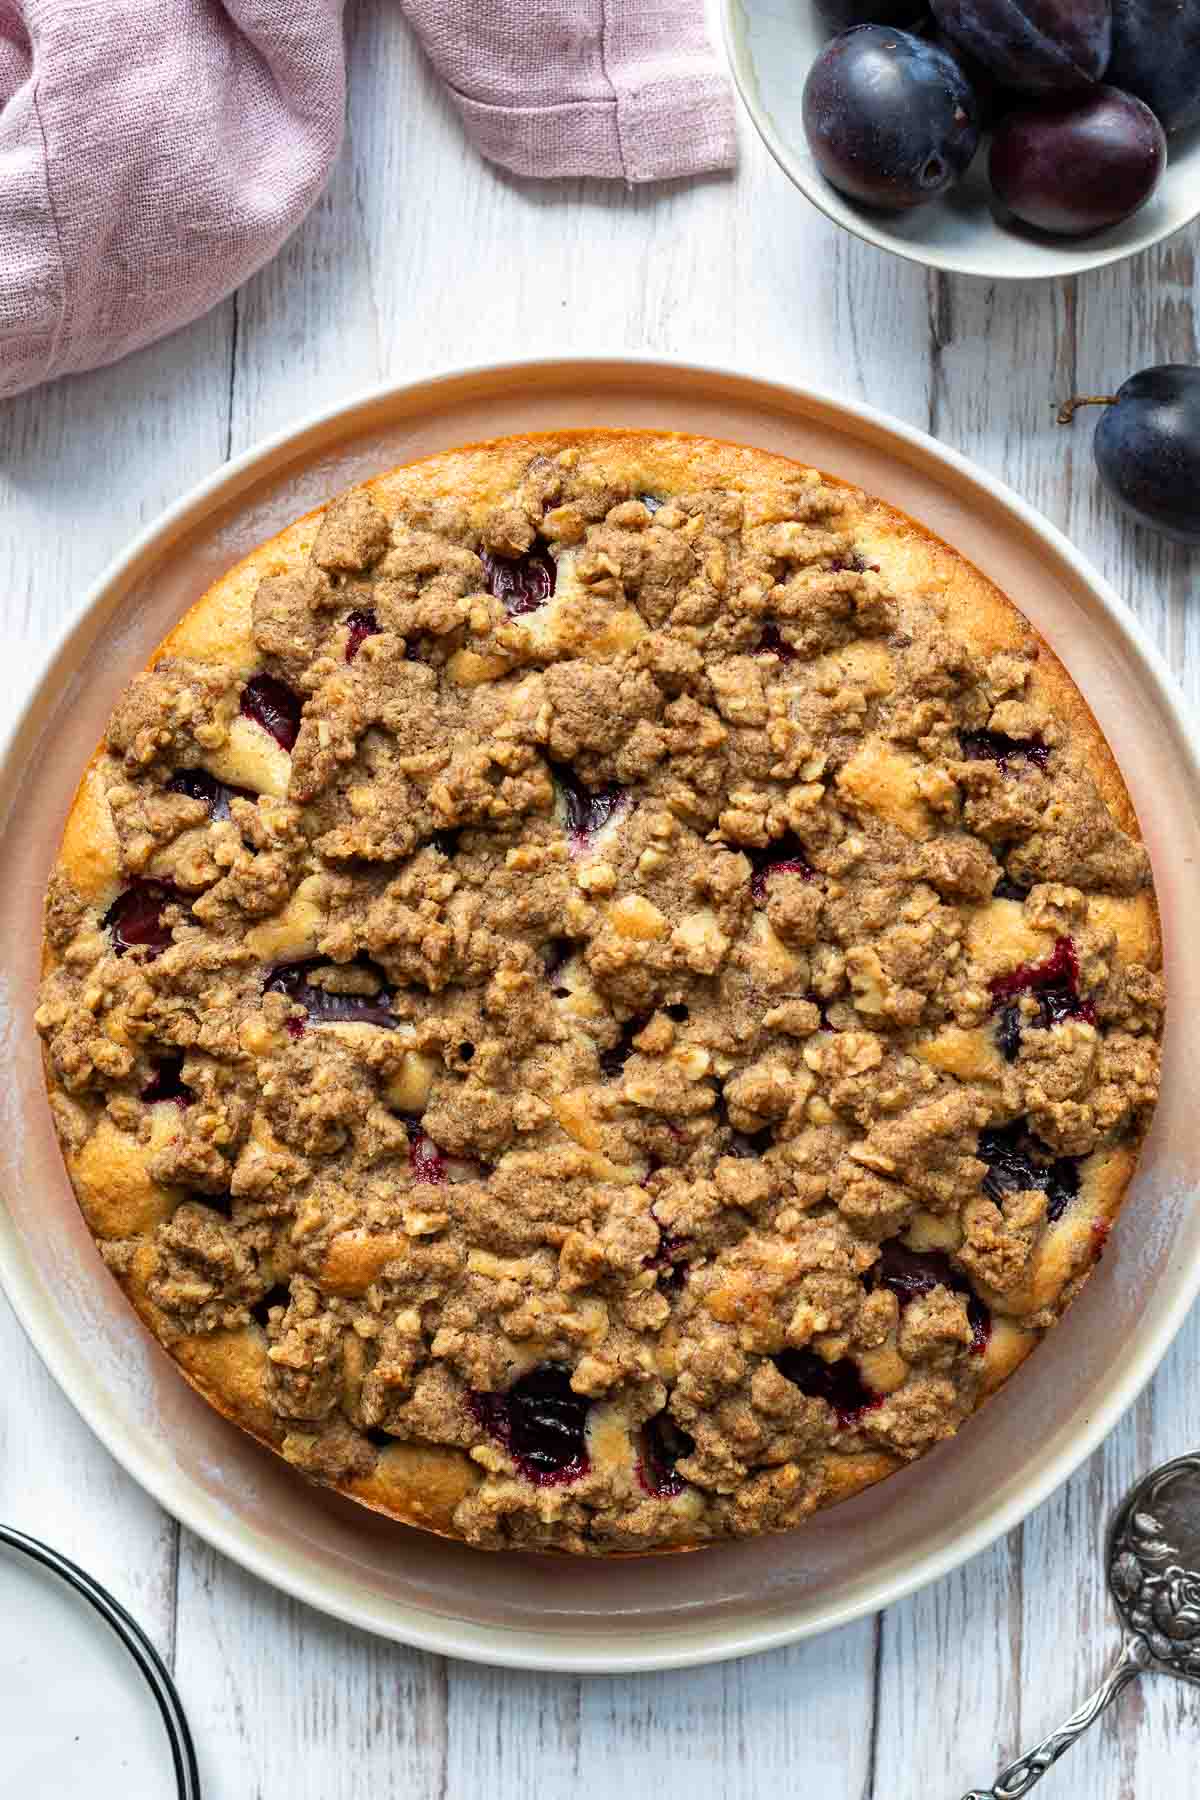 Crumble Cake with Plums 